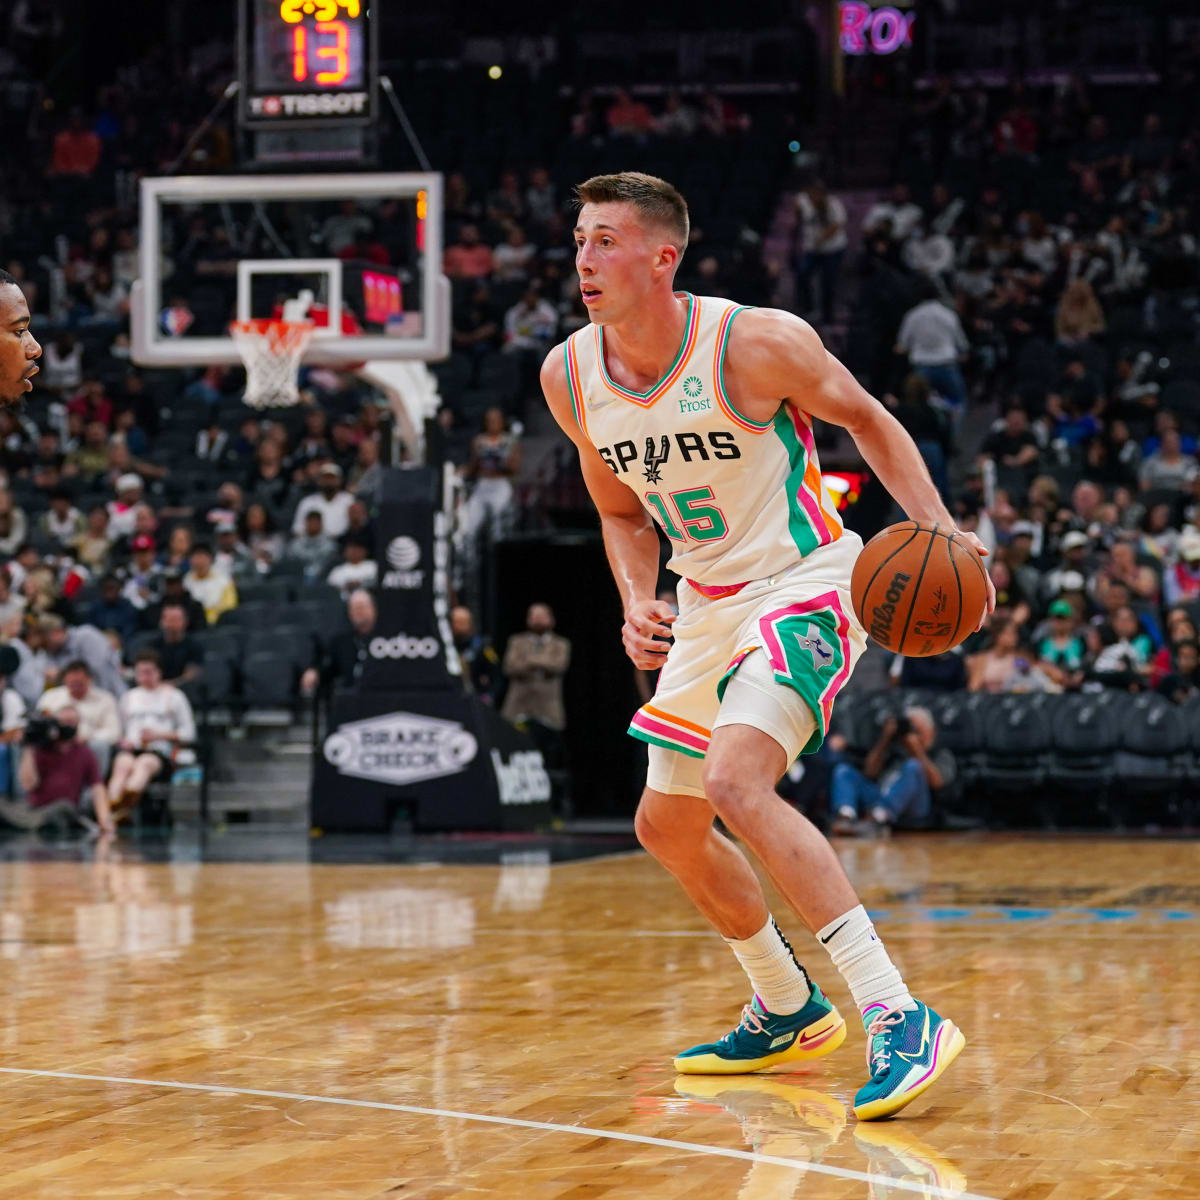 Report: Joe Wieskamp agrees to two-year deal with Spurs